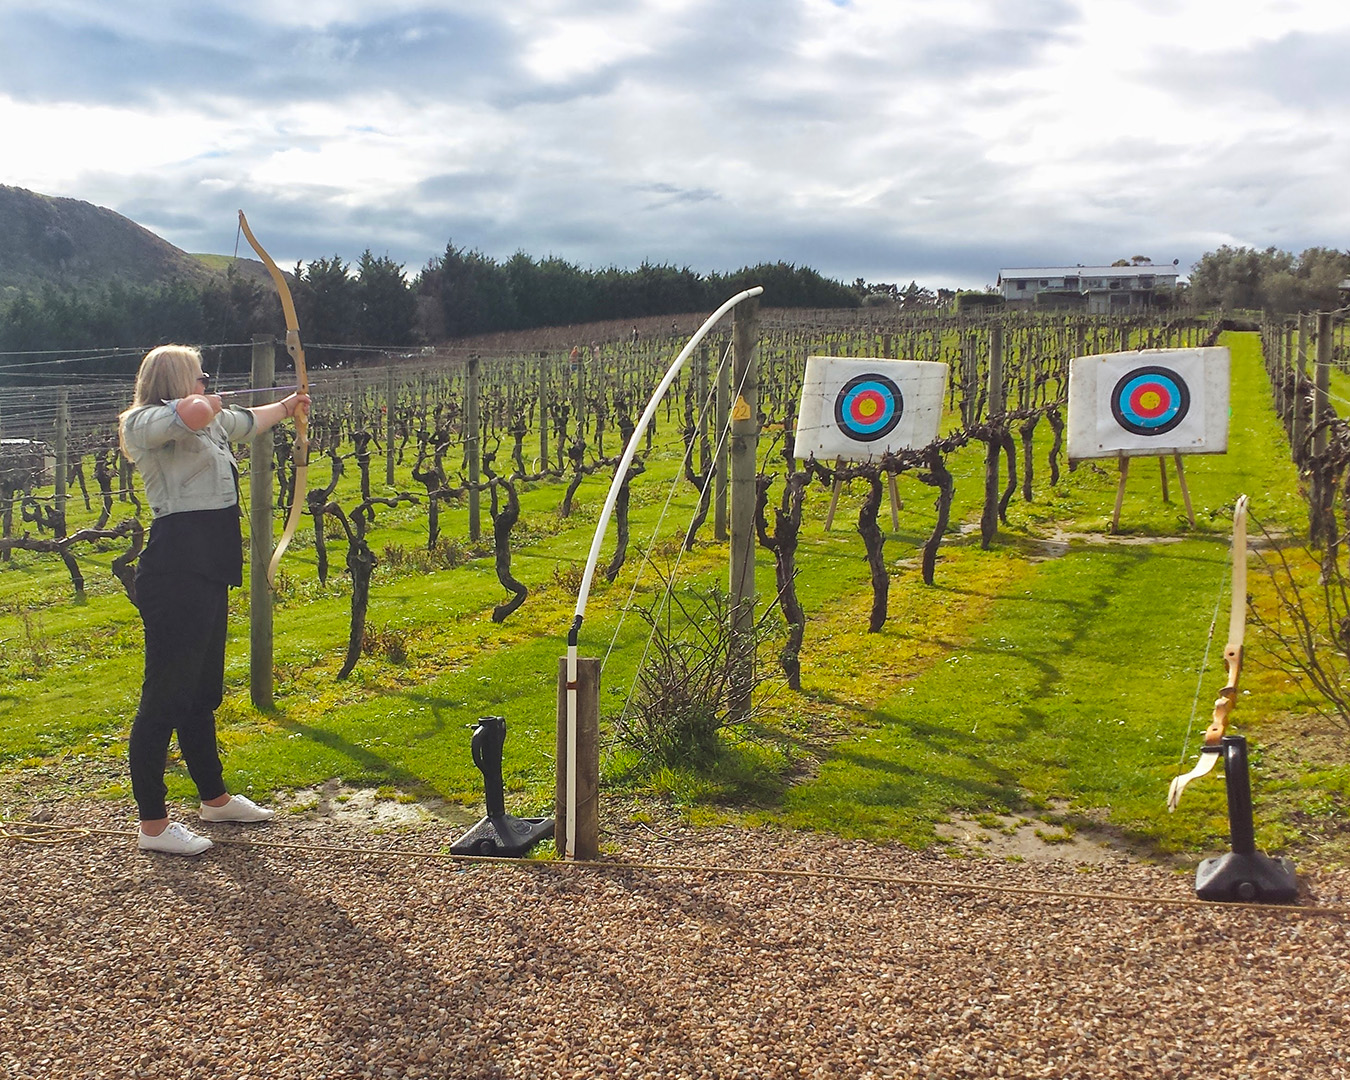 A girl takes aim with a bow and arrow at archery amongst the vines.